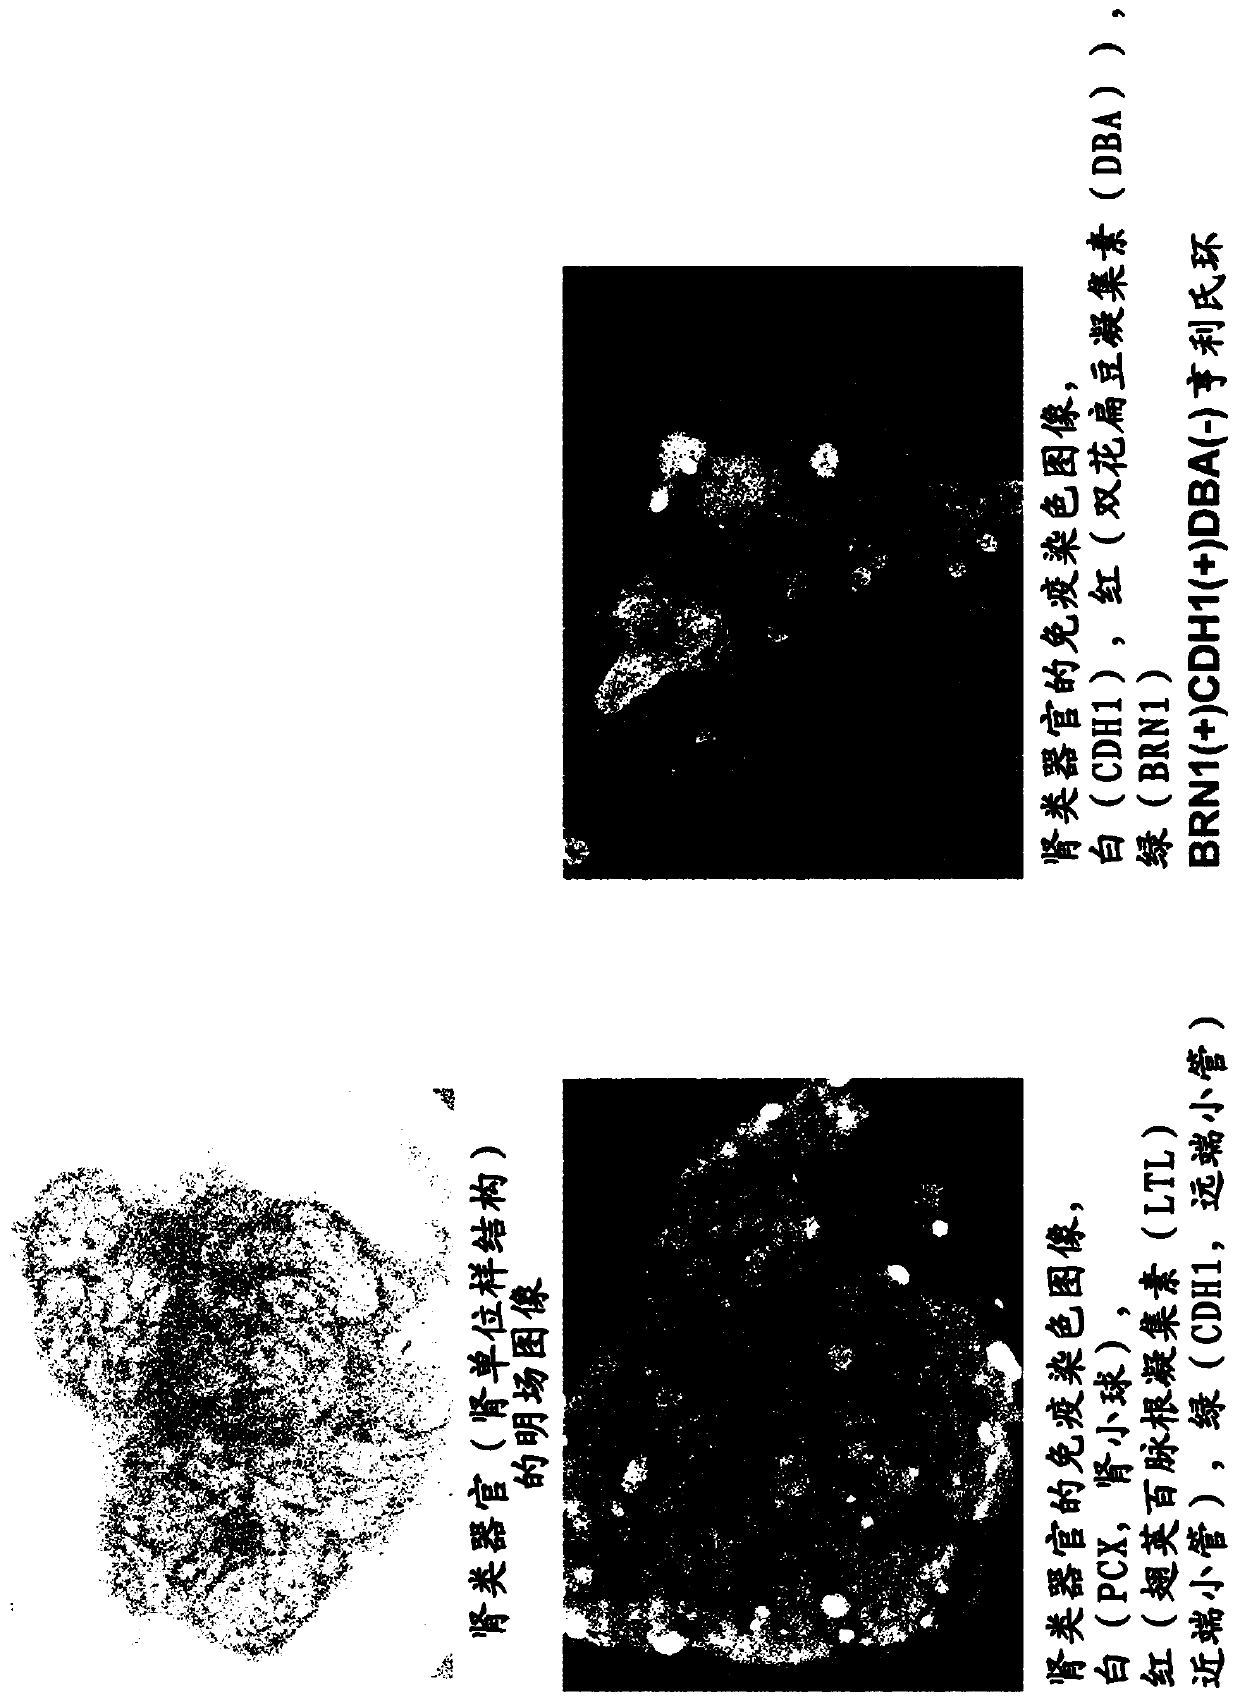 Method for inducing differentiation of intermediate mesodermal cell to renal progenitor cell, and method for inducing differentiation of pluripotent stem cell to renal progenitor cell